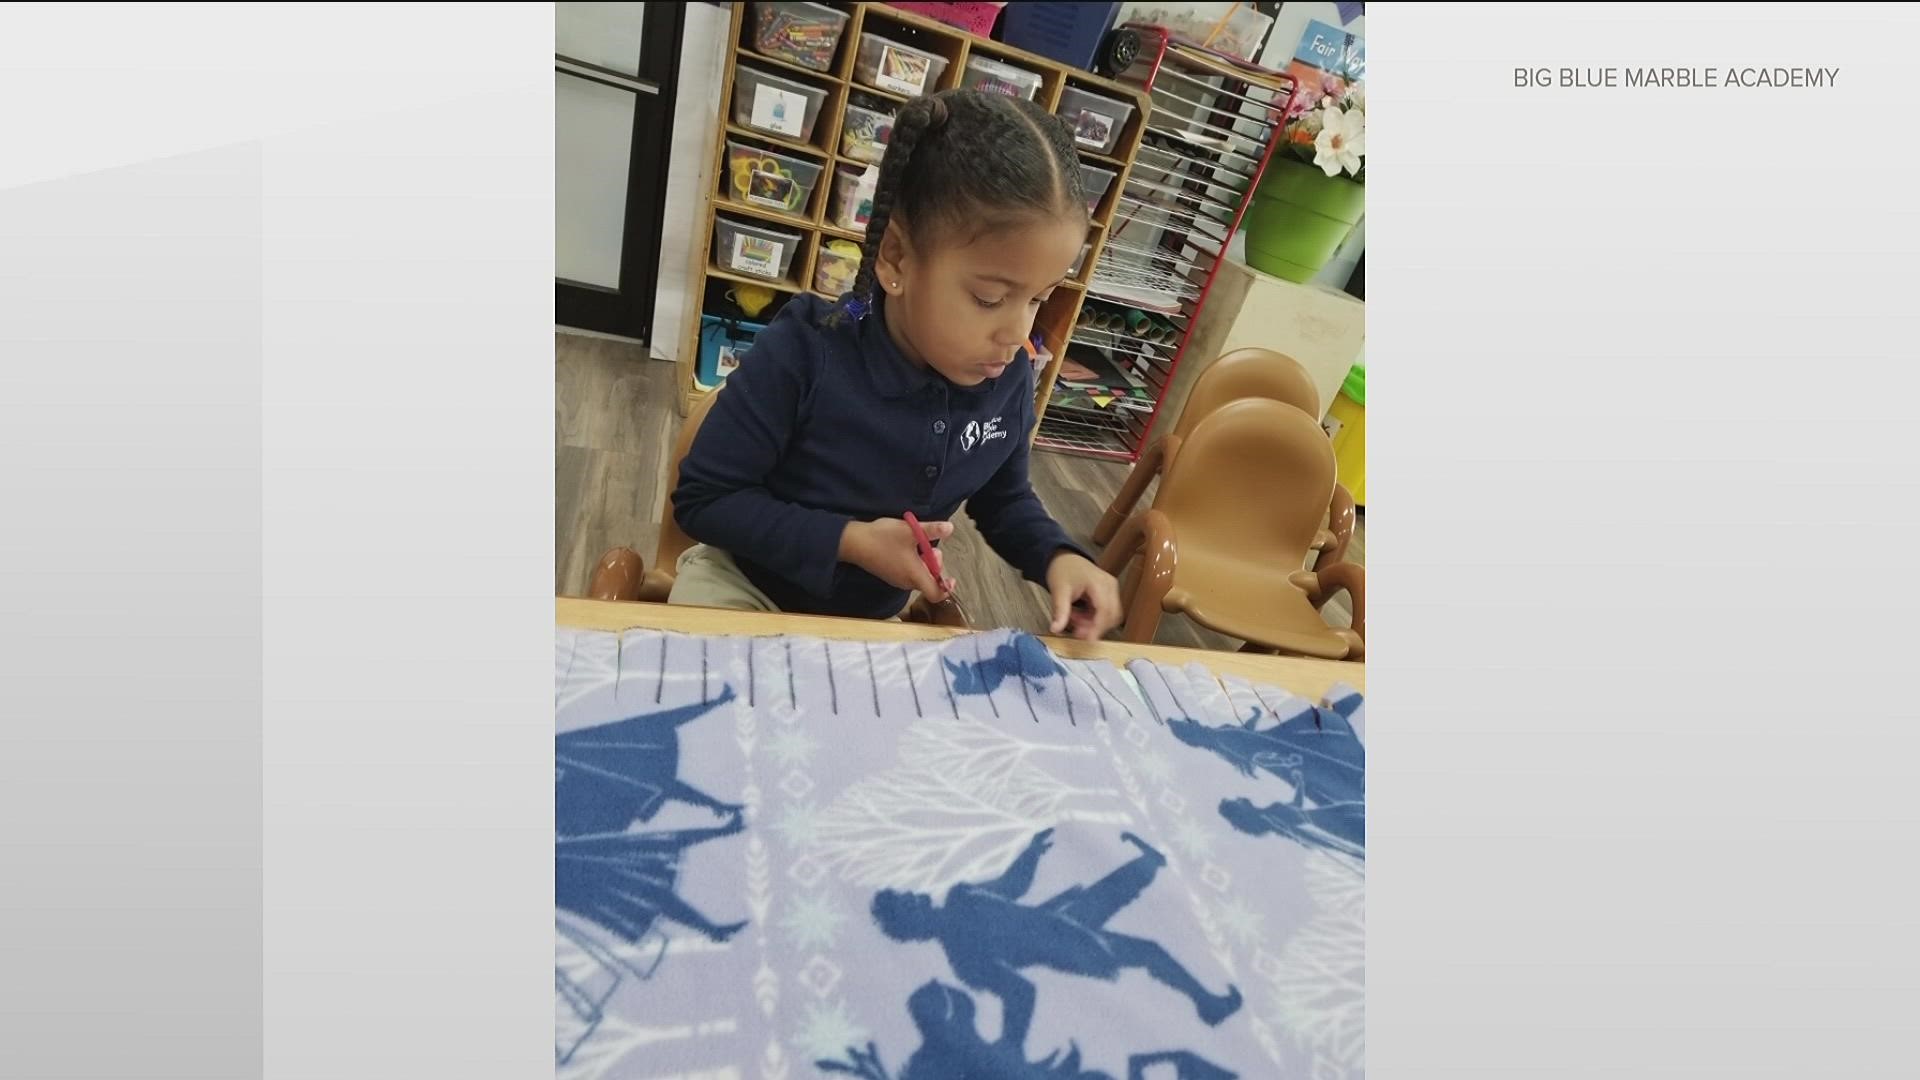 Kids at Big Blue Marble Academy are handmaking 'Blankets of Love' as part of their network-wide annual winter Heart Project.